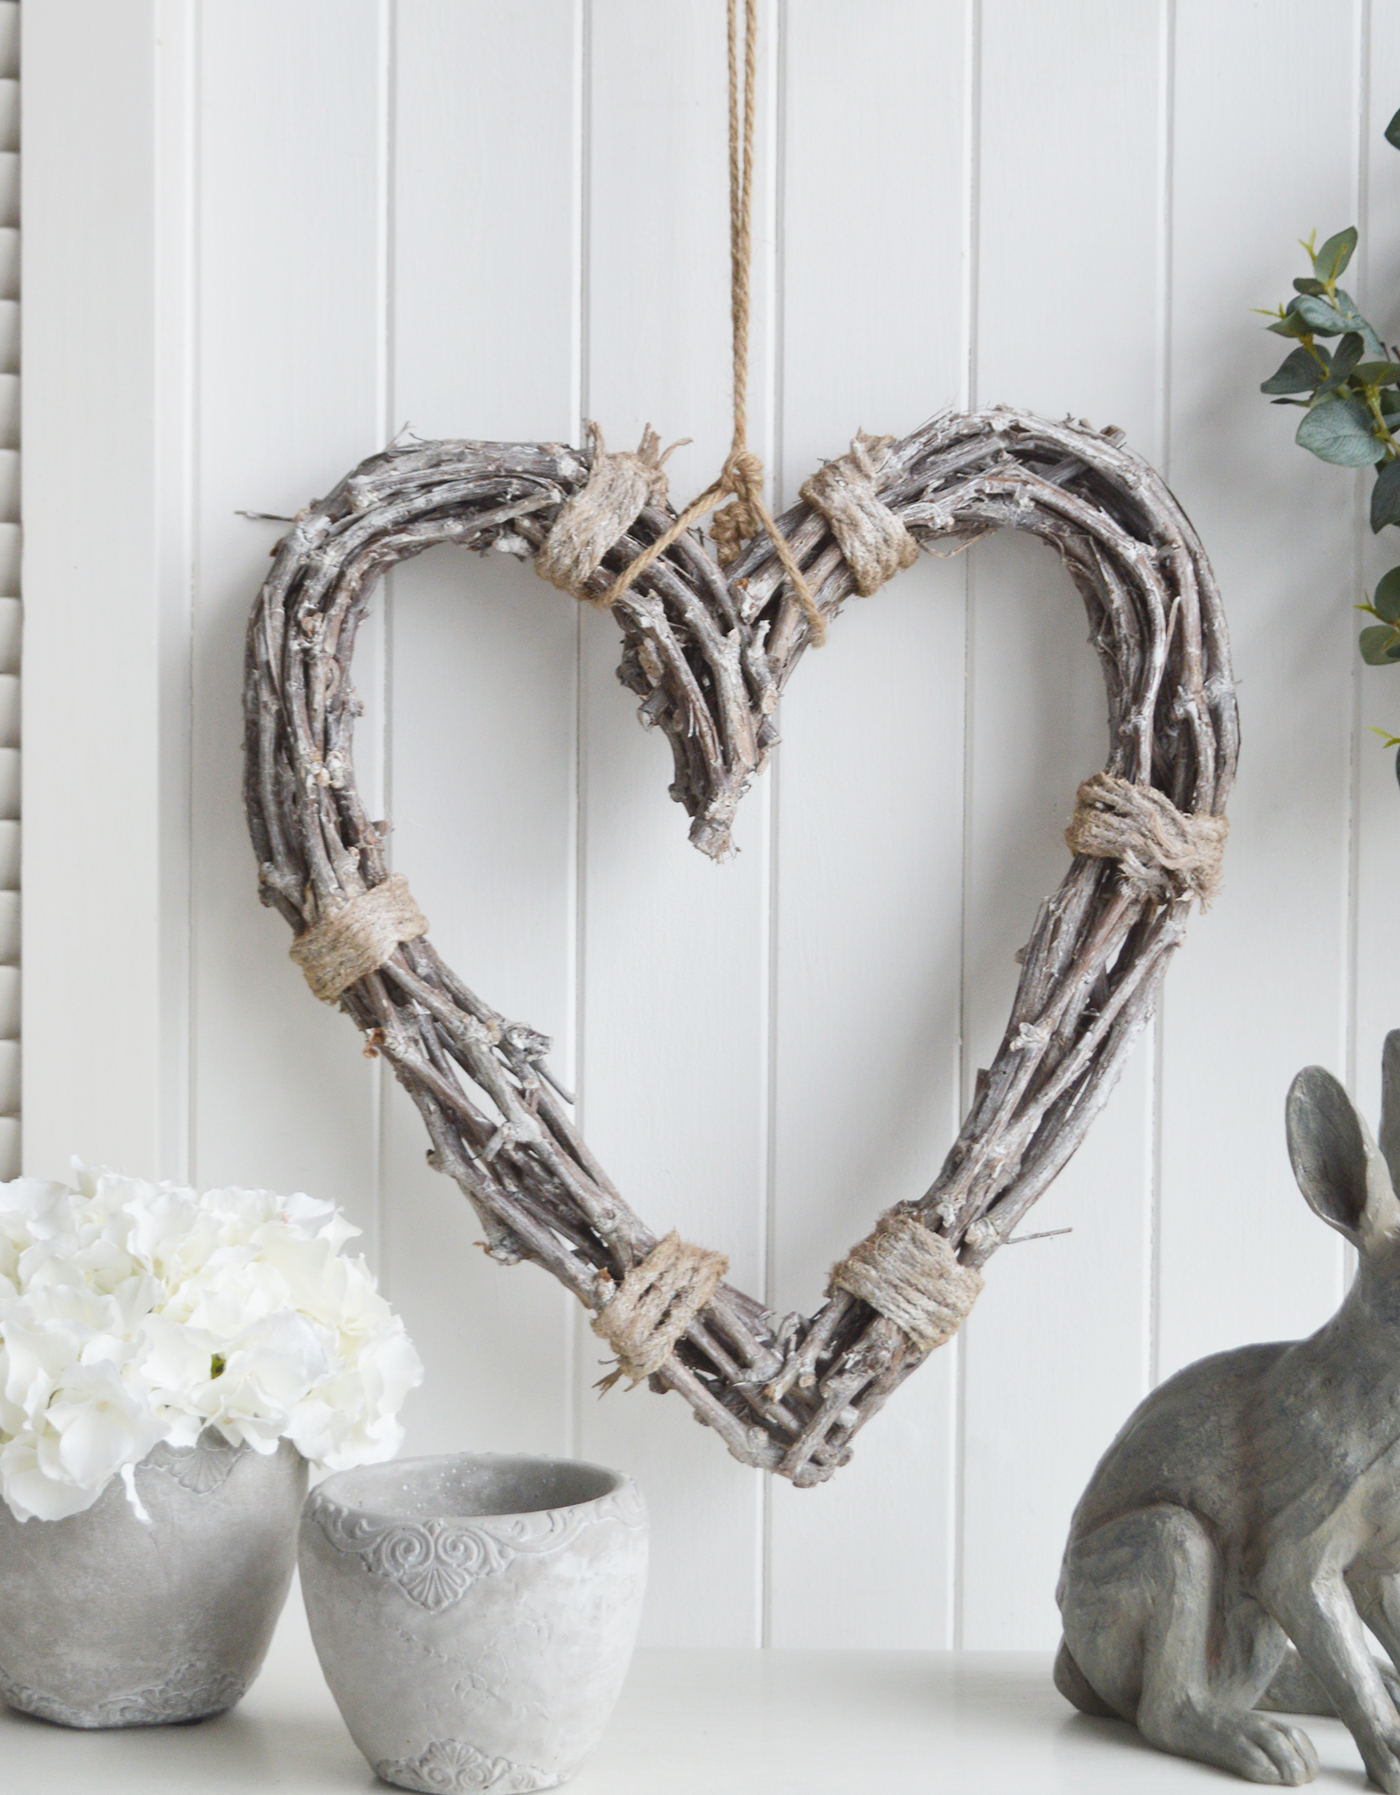 Driftwood Heart Wall Decor - The White Lighthouse